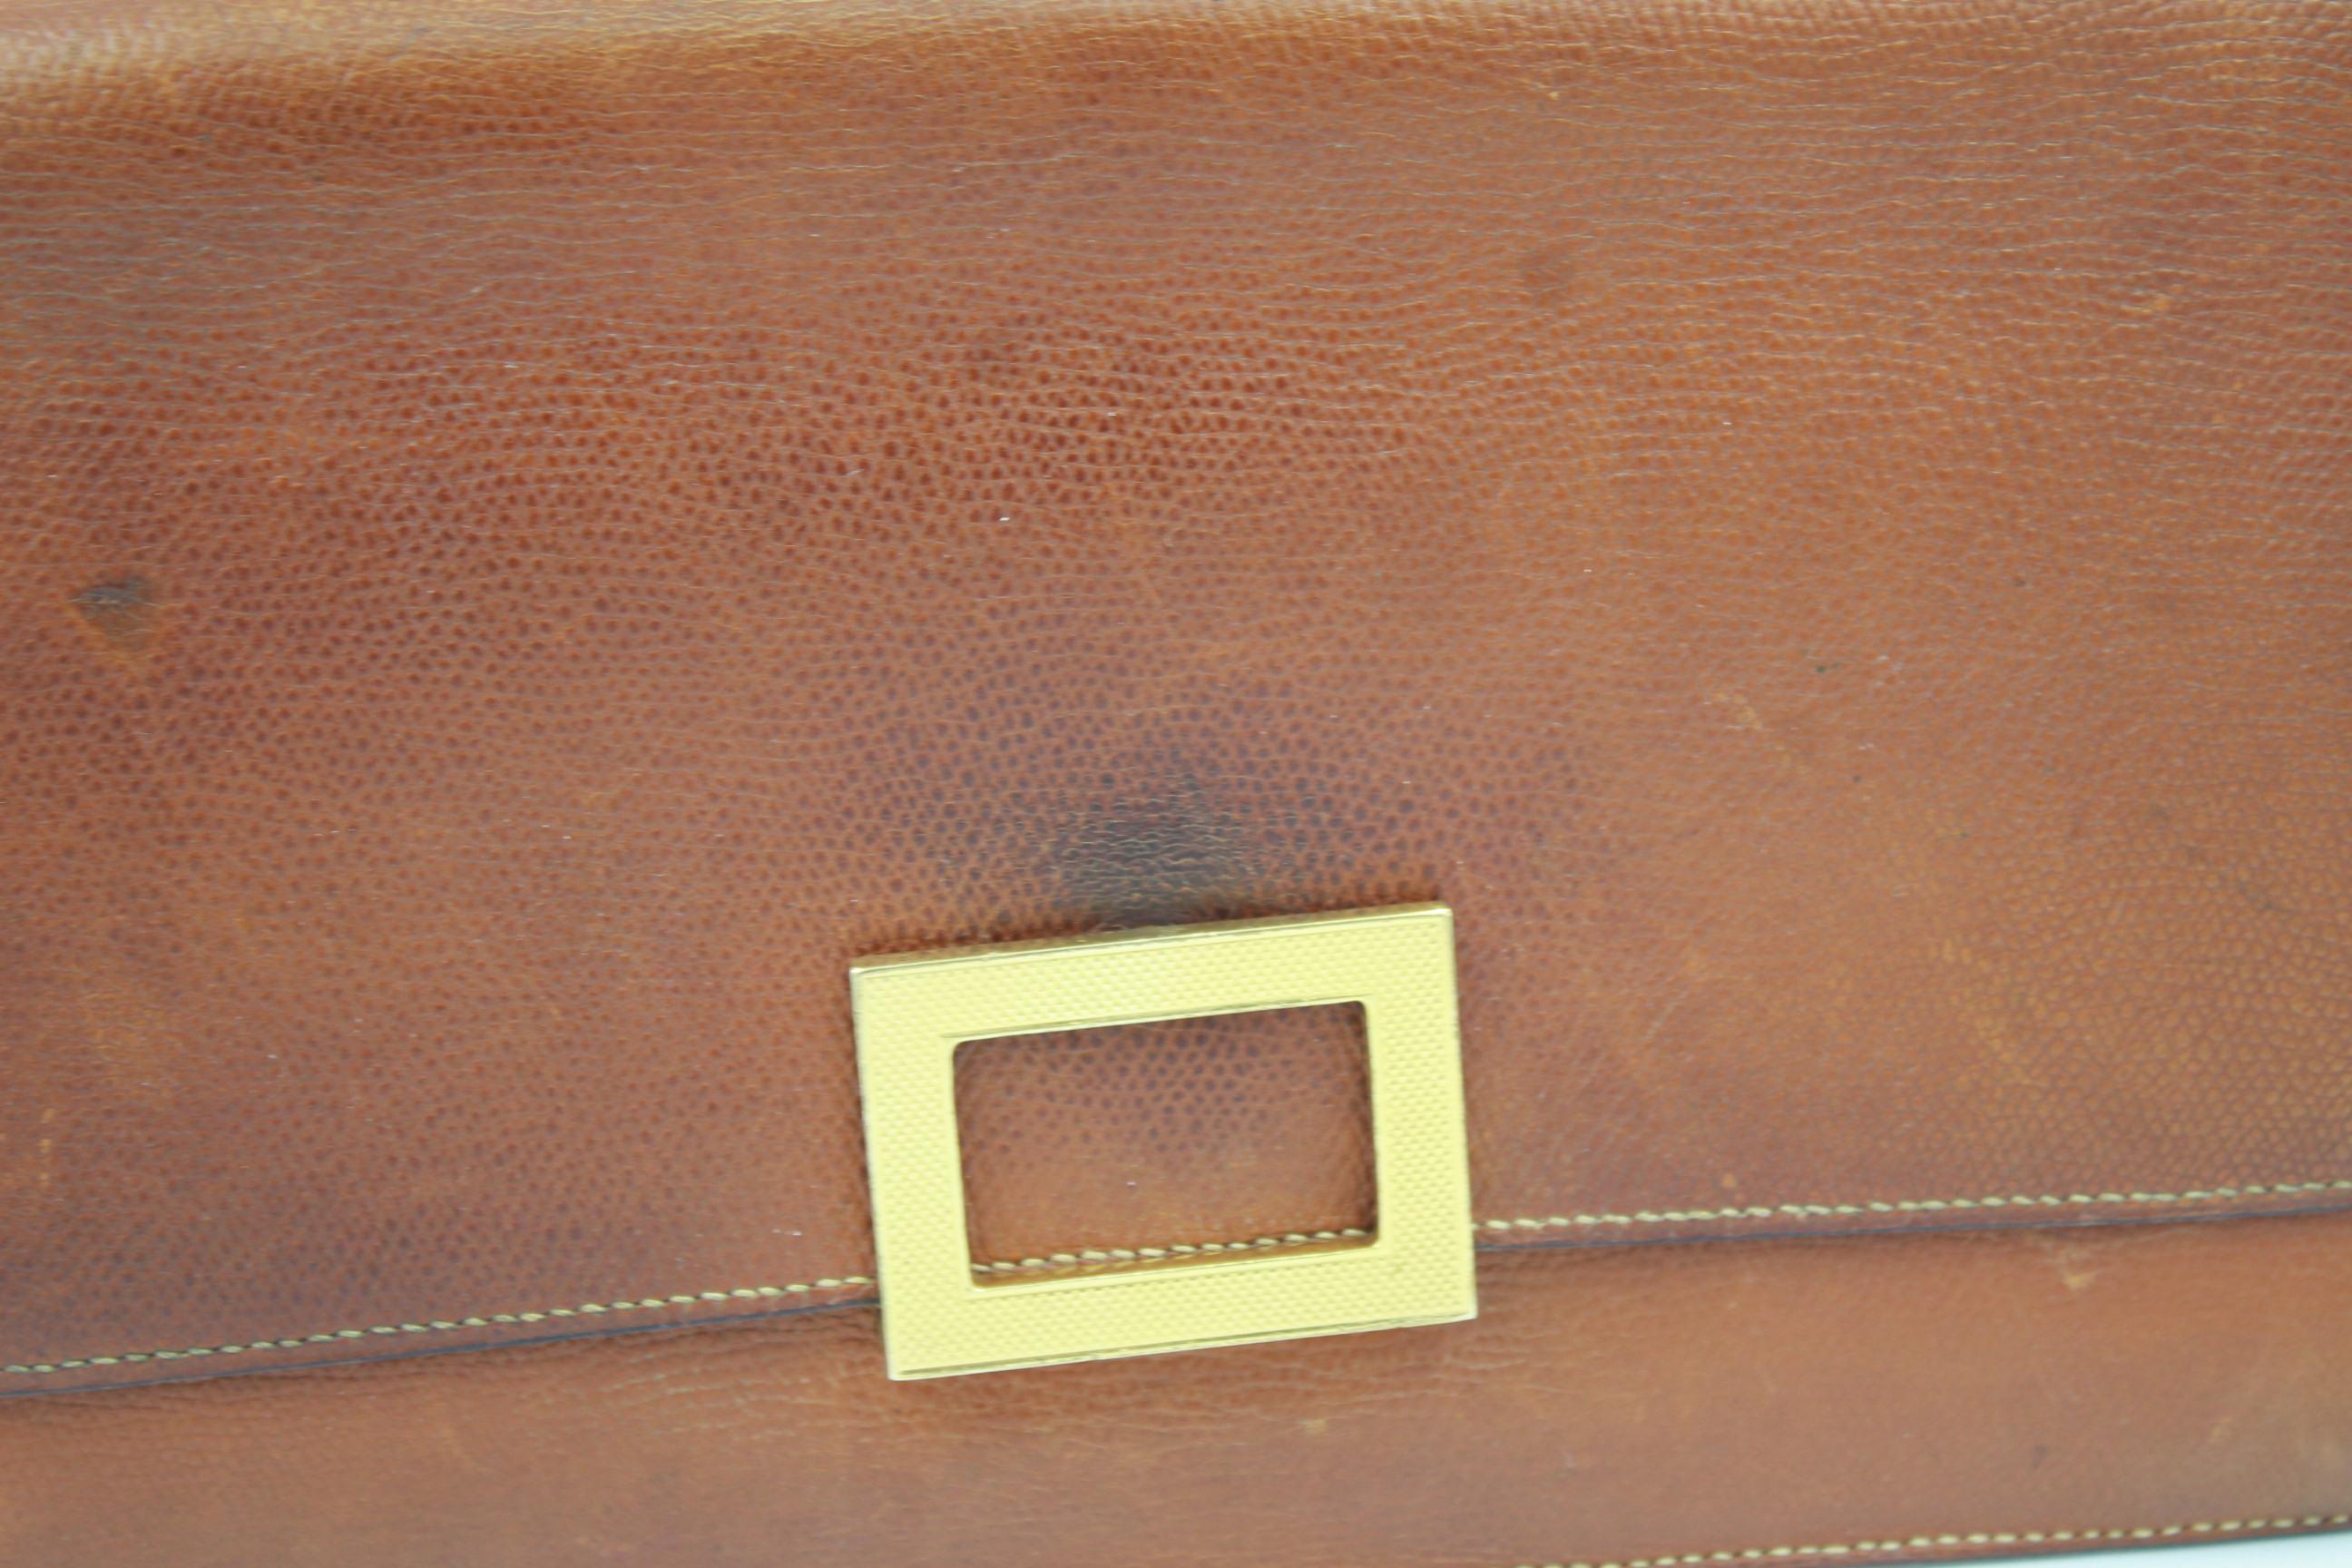 Vintage 60's Hermes bag in grained leather. Quite used but still nice to wear. Really nice clasp. Patina and stains all over. Size 25x15